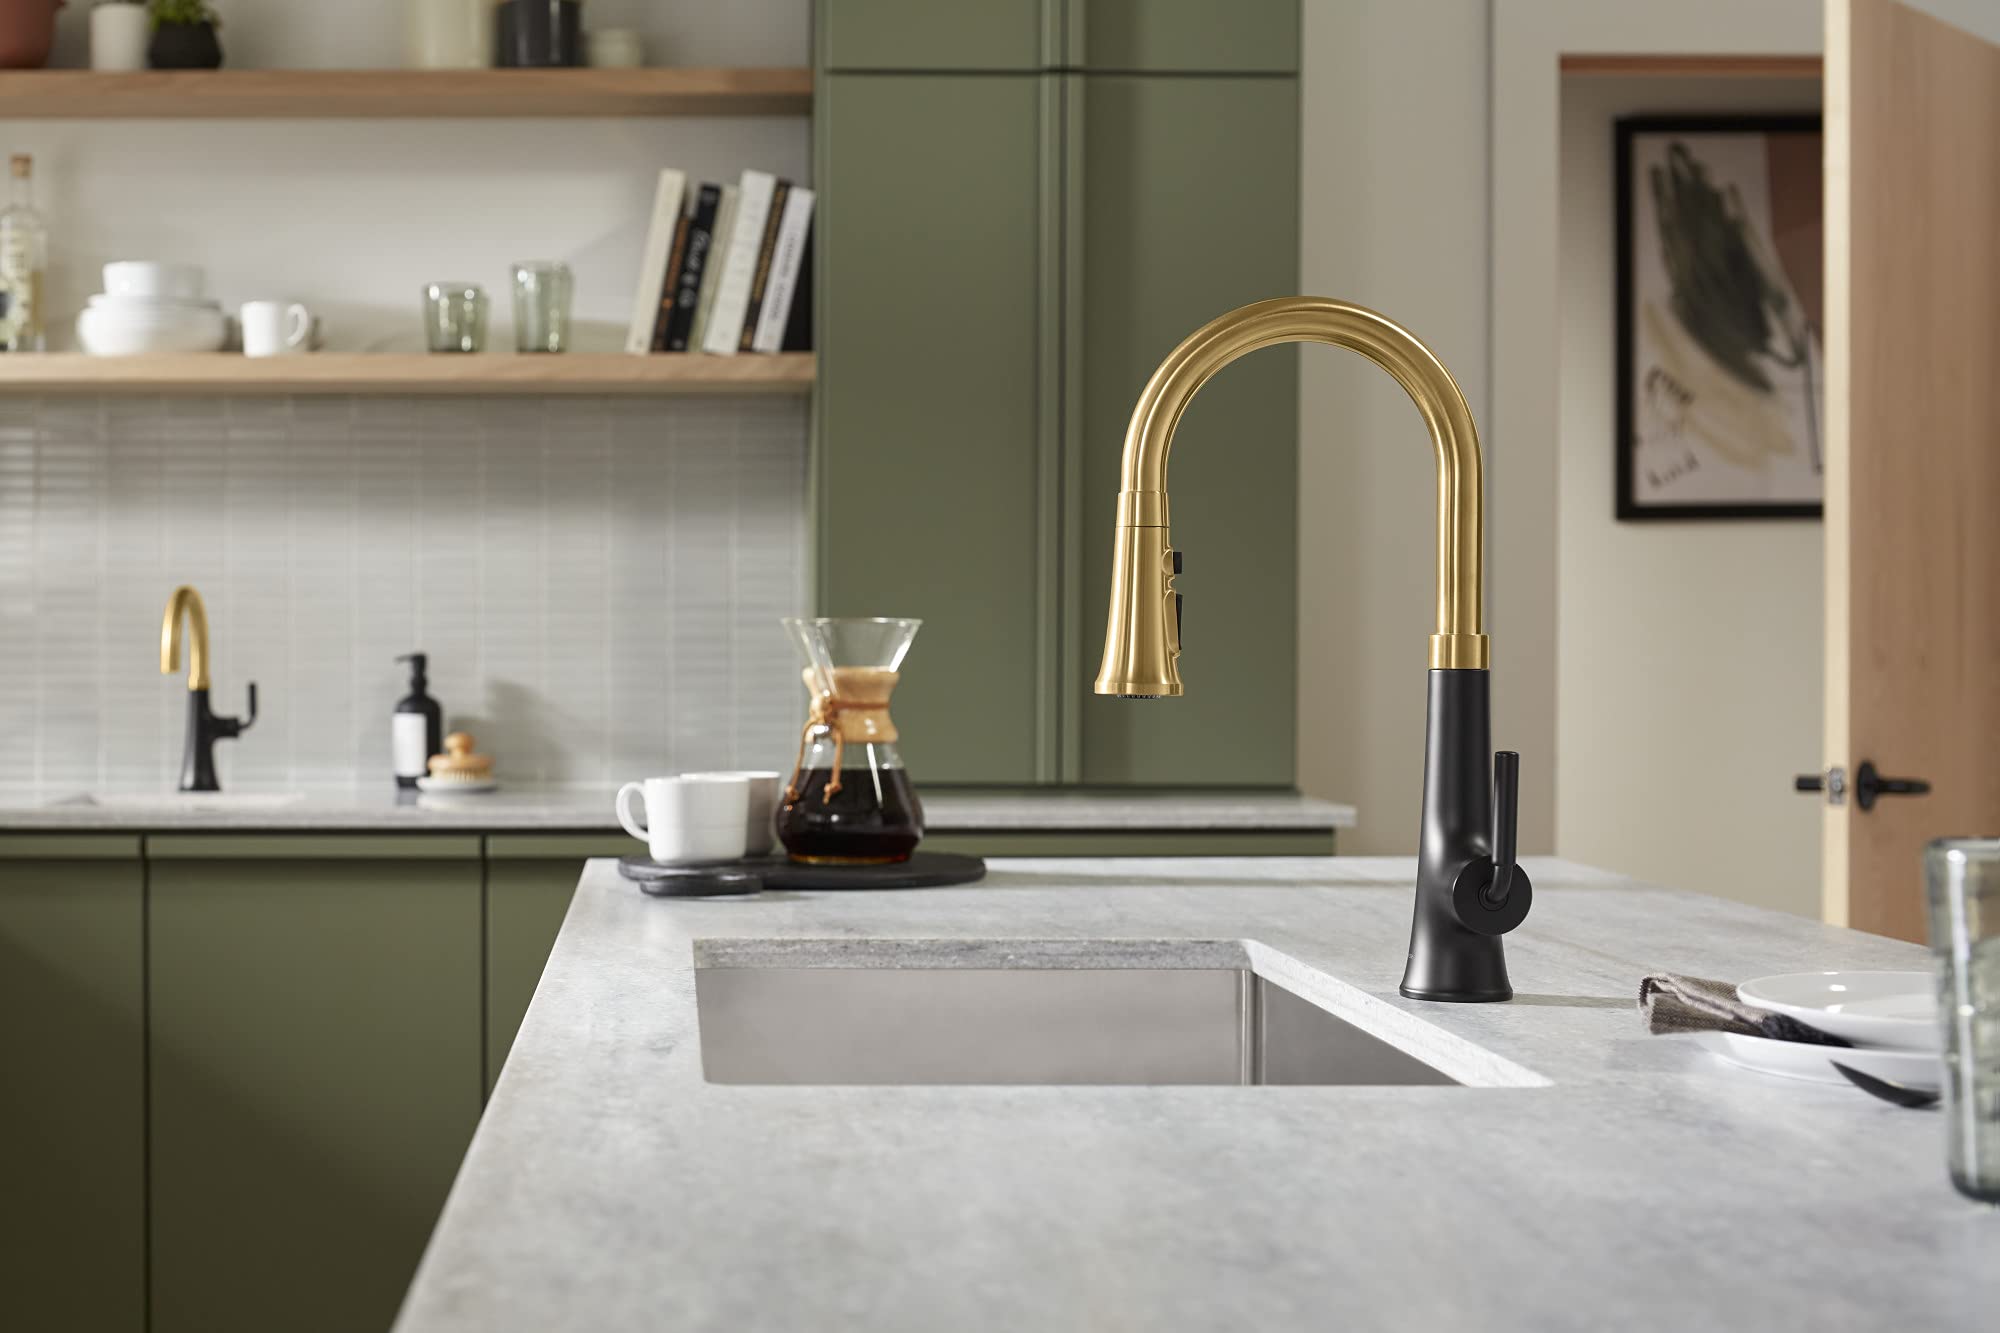 Kohler 23766-WB-BMB Tone Voice-Activated Sink, Touchless Kitchen Faucet with Pull Down Sprayer, Matte Black Moderne Brass